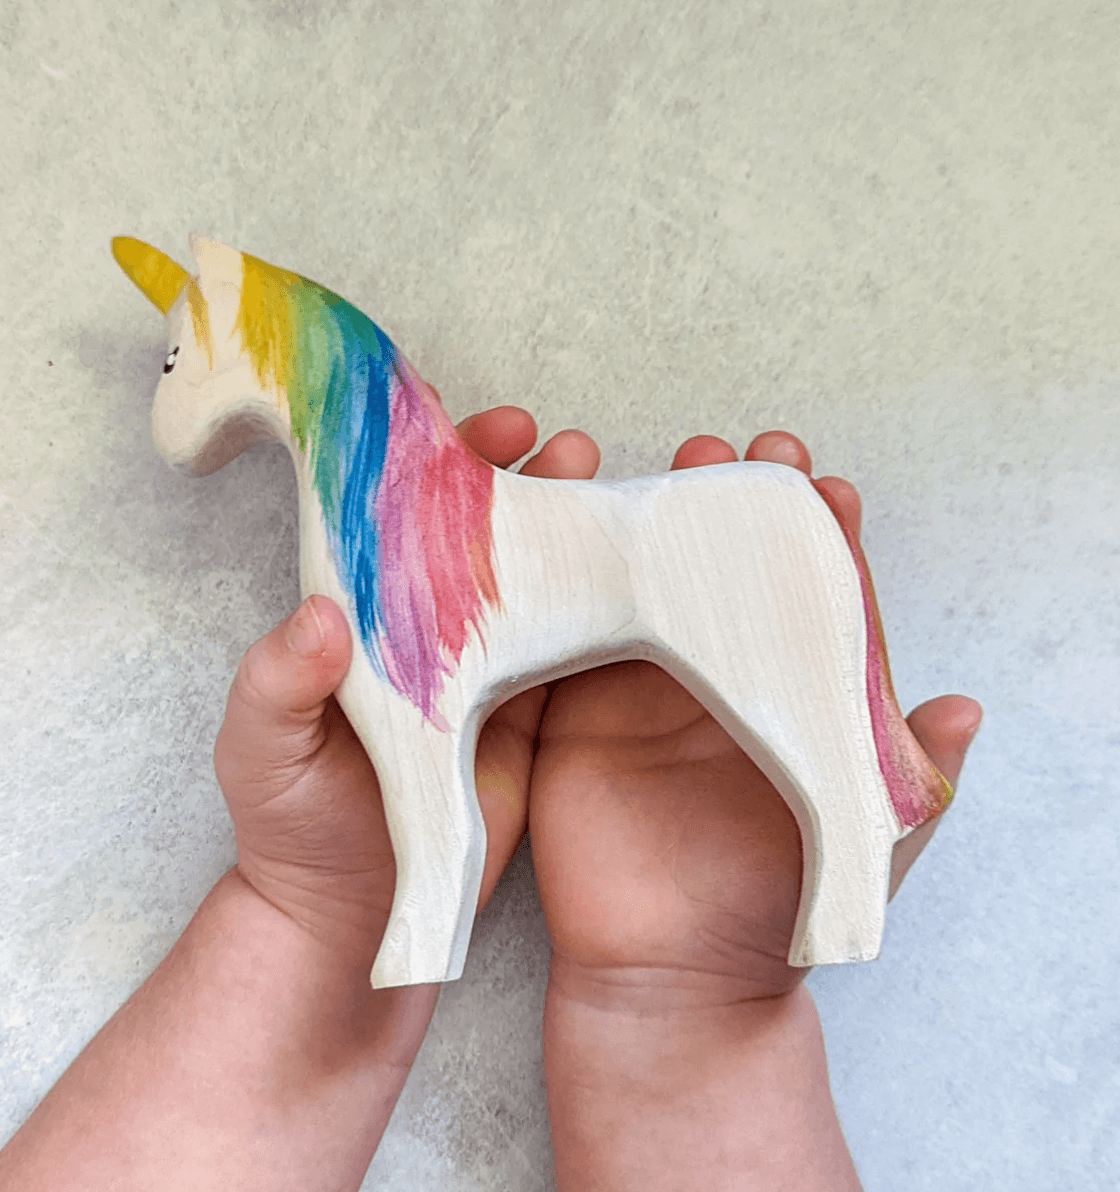 The Curated Parcel - NOM // Rainbow Unicorn 